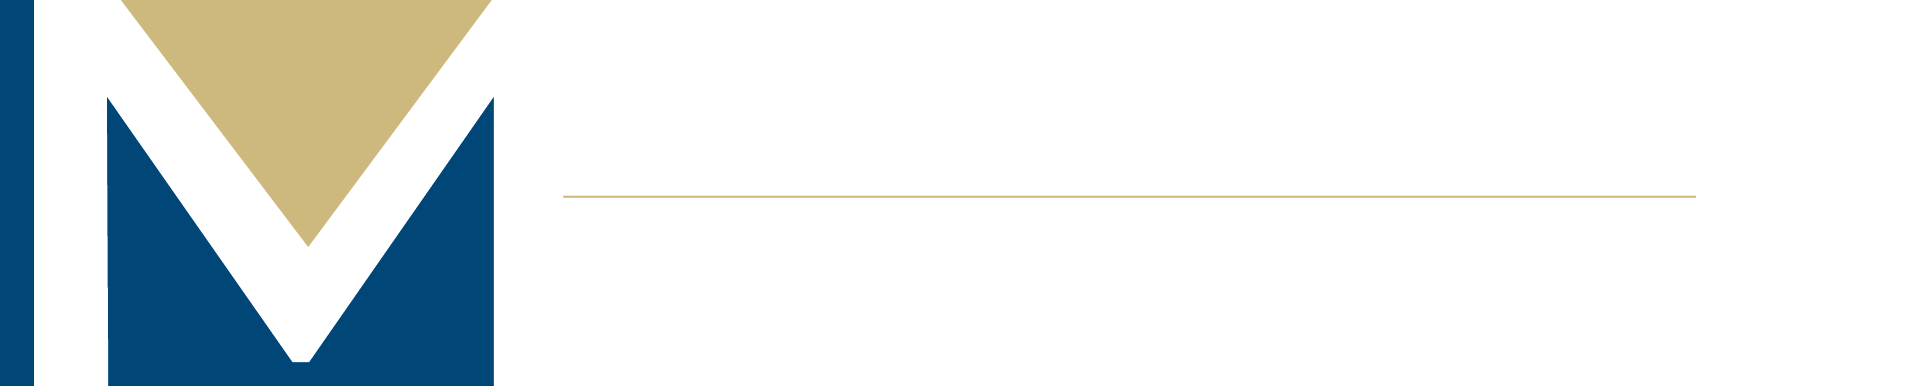 McInnis Builders LLC - Panama City Beach FL General Contracting and Construction Management Firm